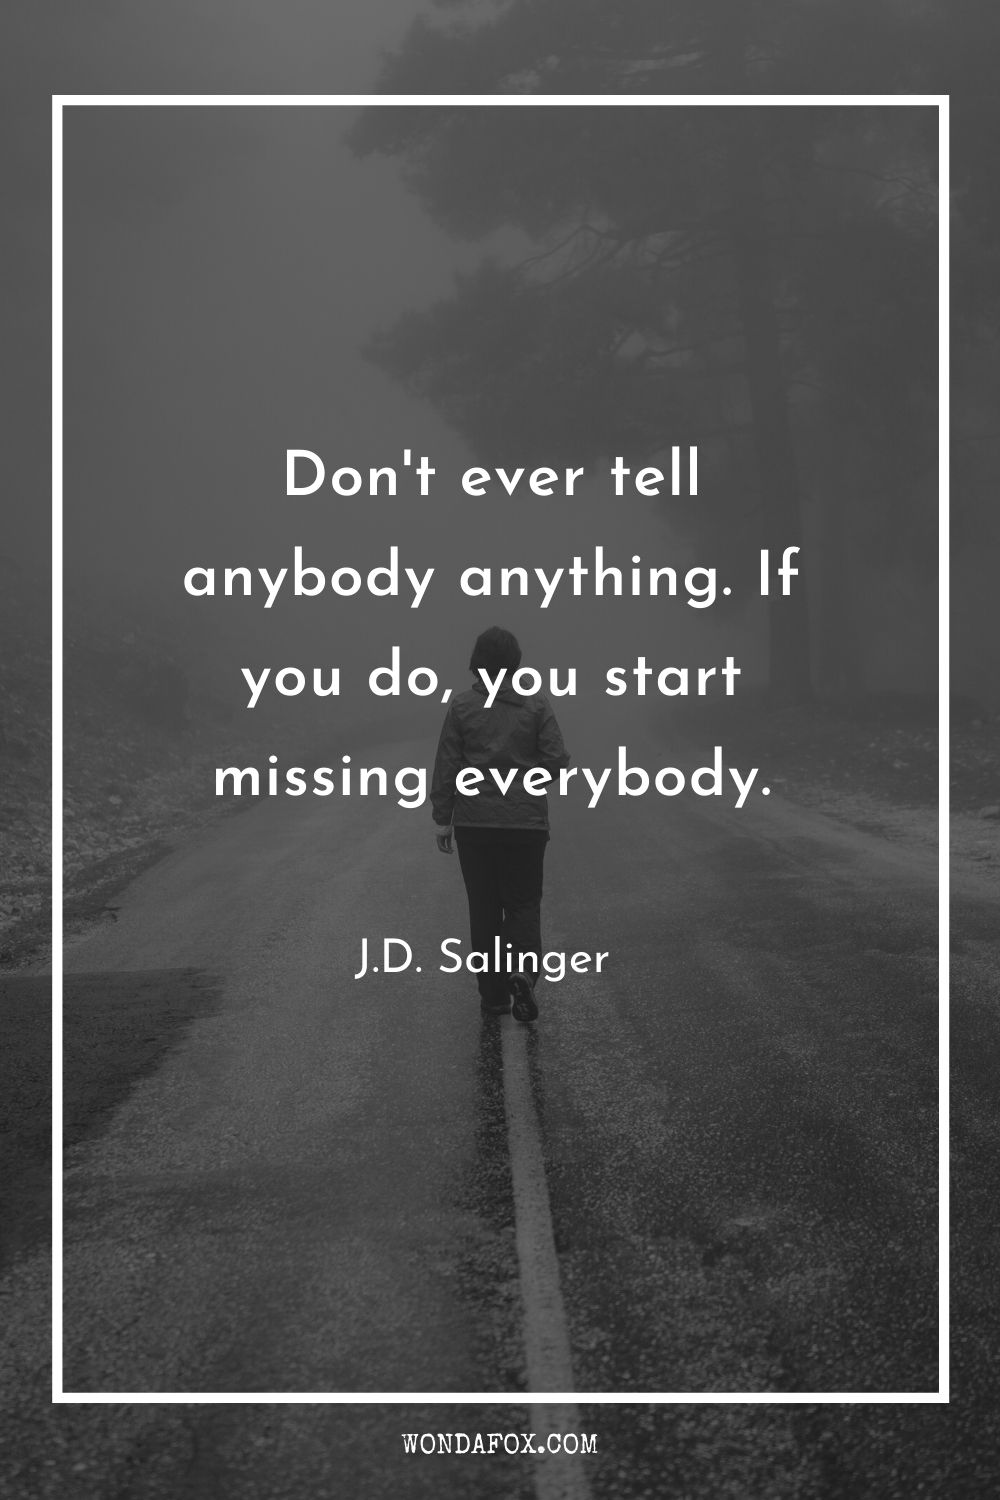 Don't ever tell anybody anything. If you do, you start missing everybody.